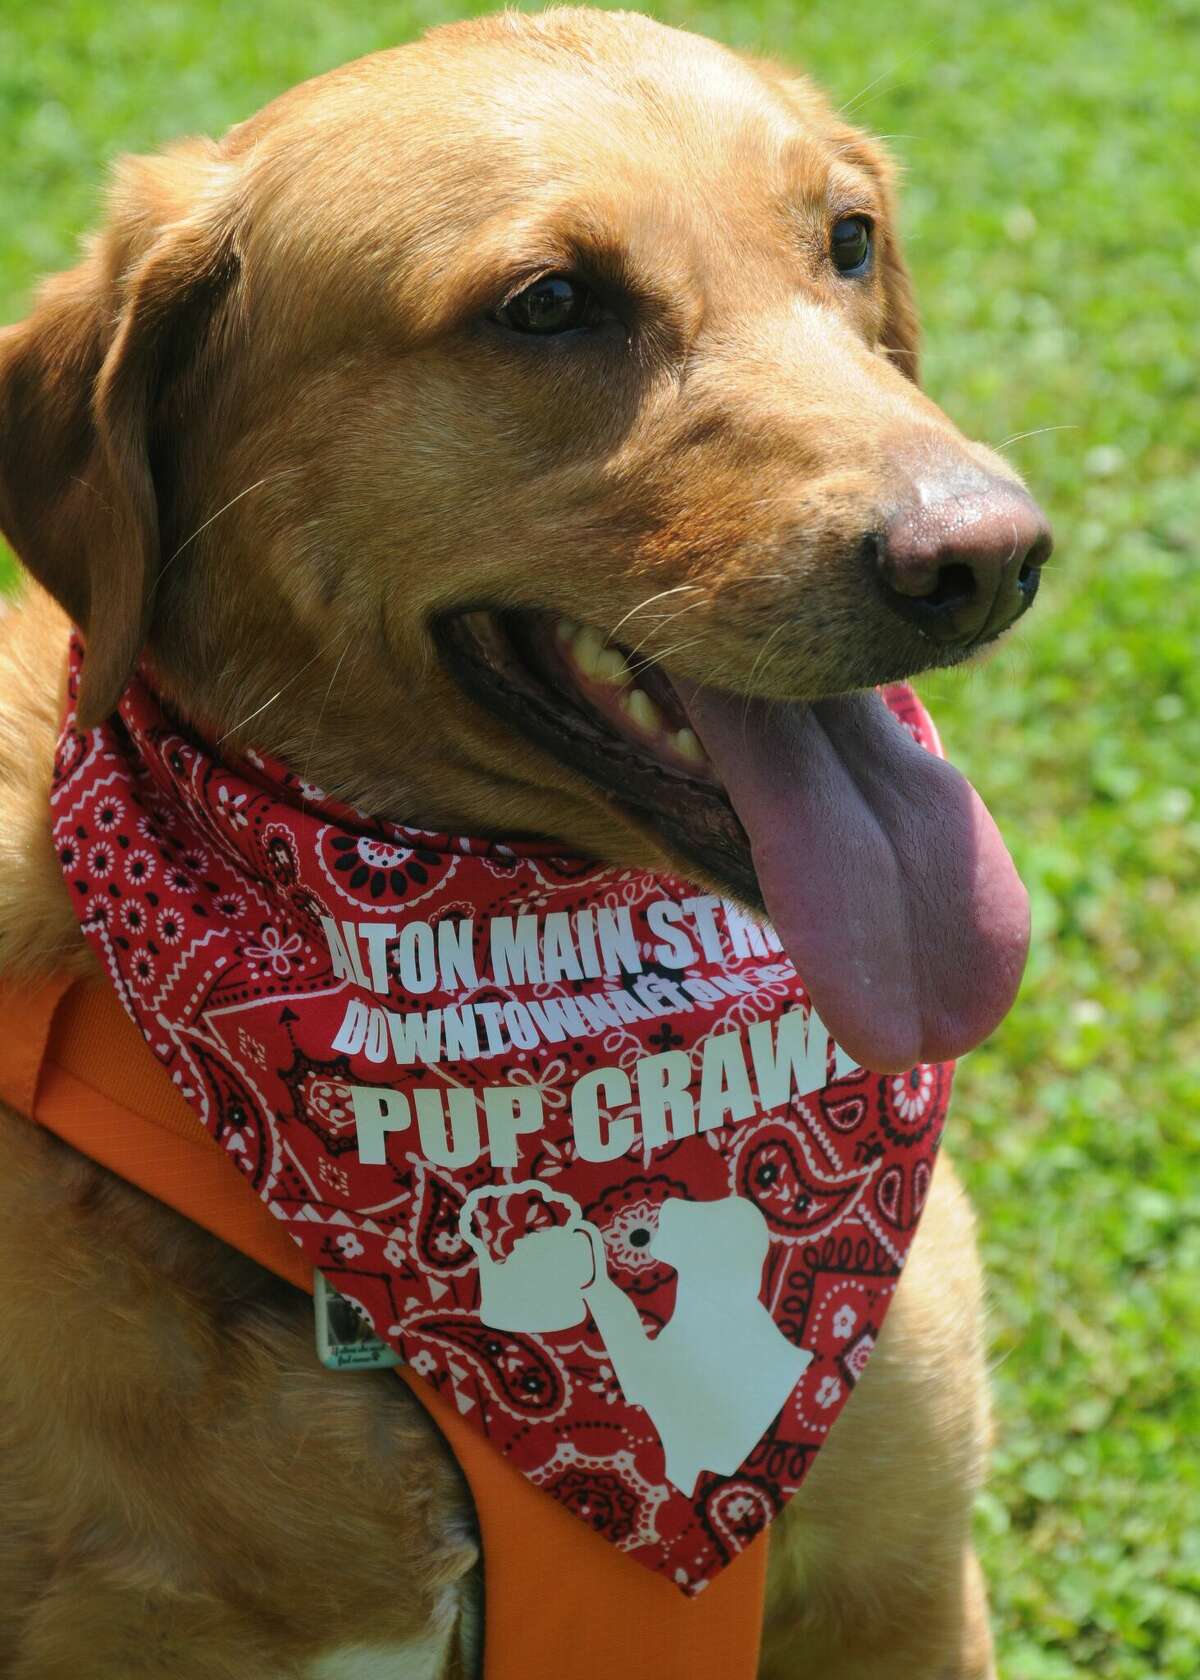 Lucille, who belongs to Michelle Dalton of Alton, sports her Pup Crawl neckerchief on Saturday. More than two dozen businesses welcomed people and their dogs during the event.